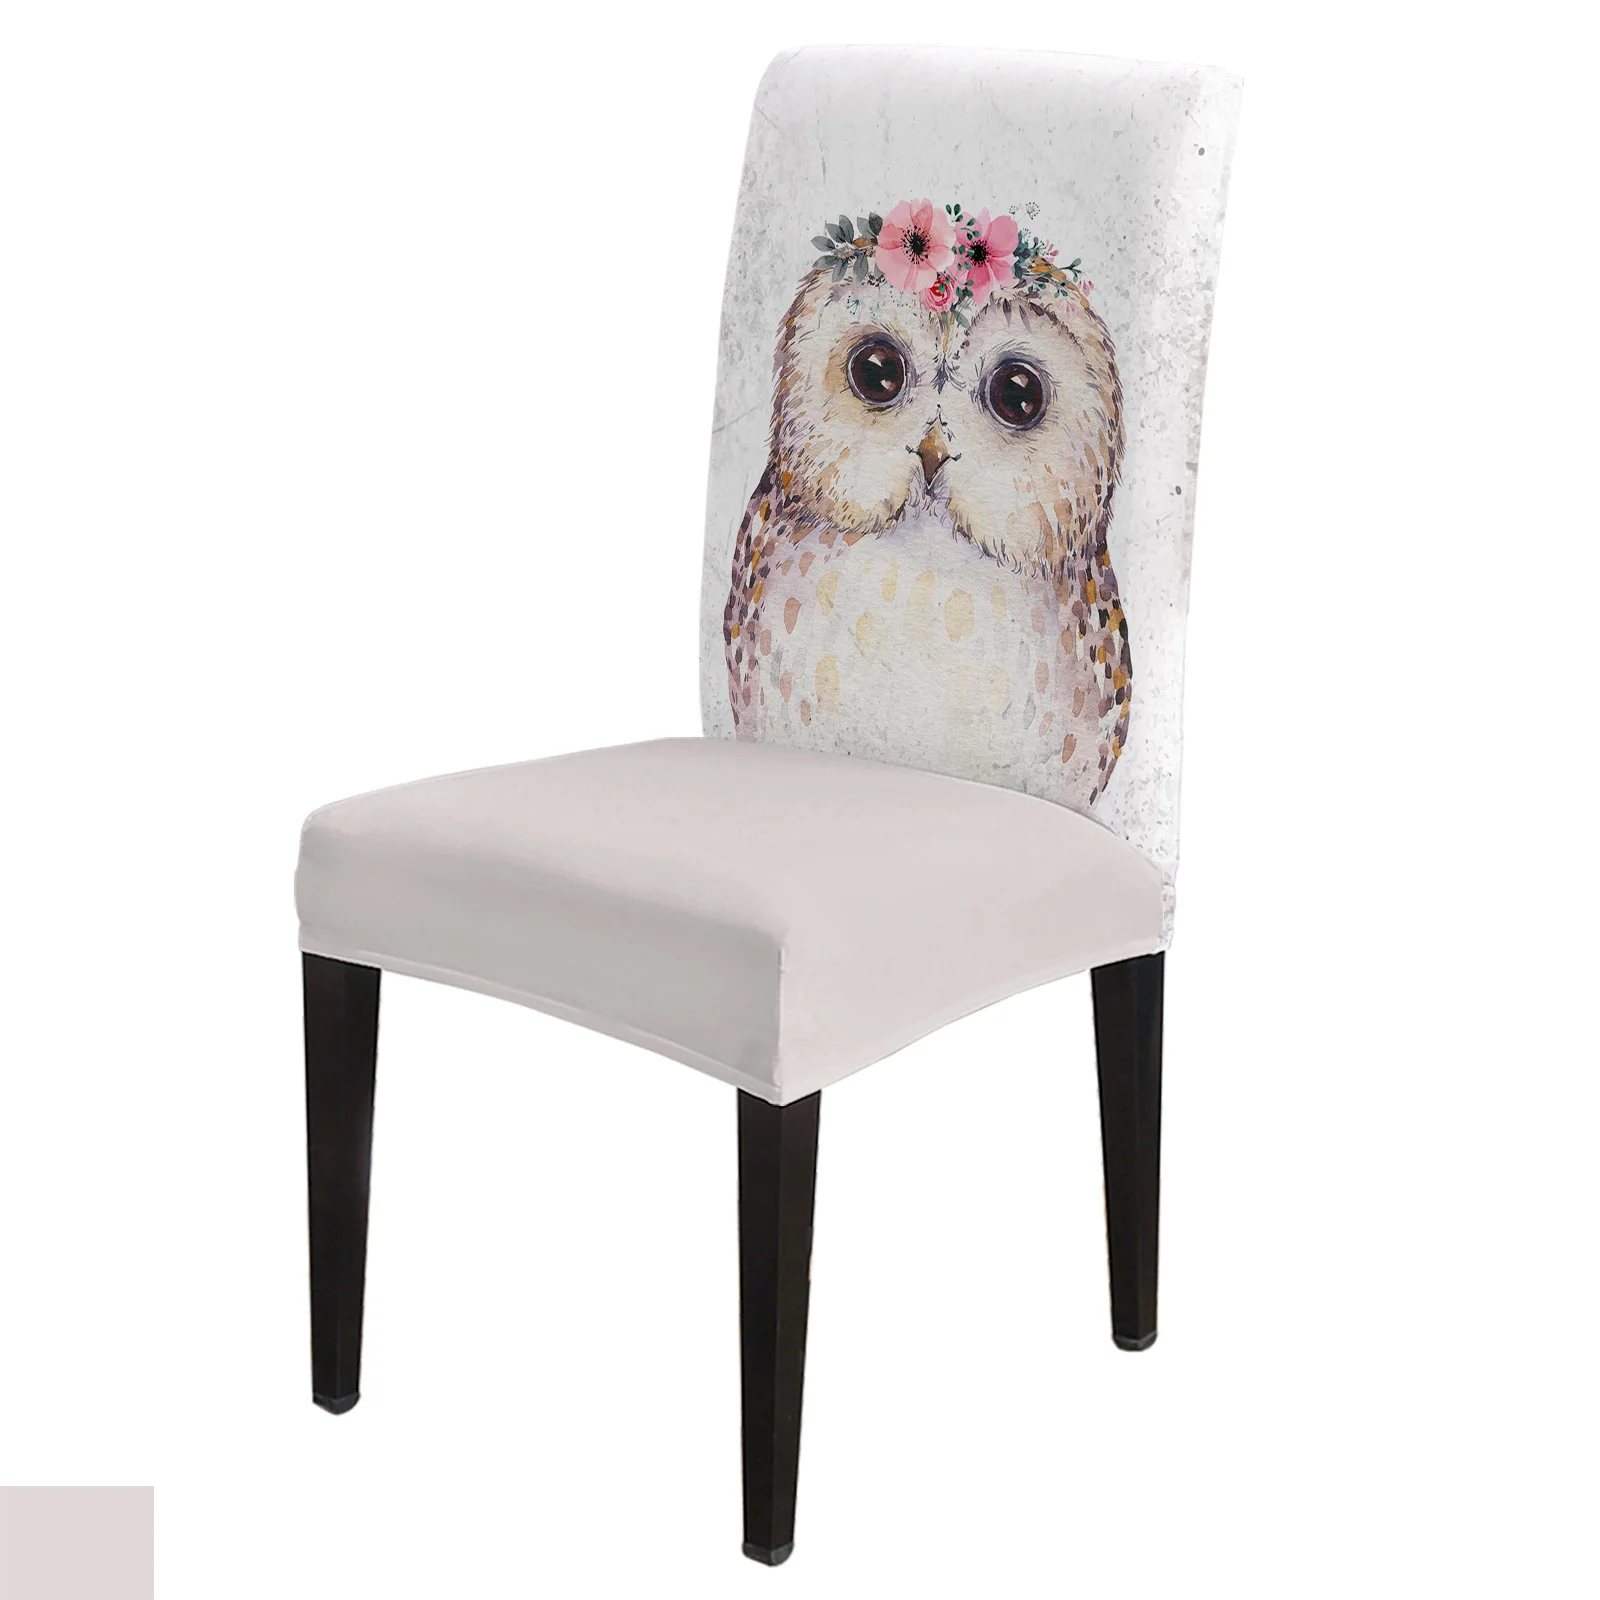 

Owl Watercolor Animal With Flowers Dining Chair Cover 4/6/8PCS Spandex Elastic Chair Slipcover Case for Wedding Home Dining Room